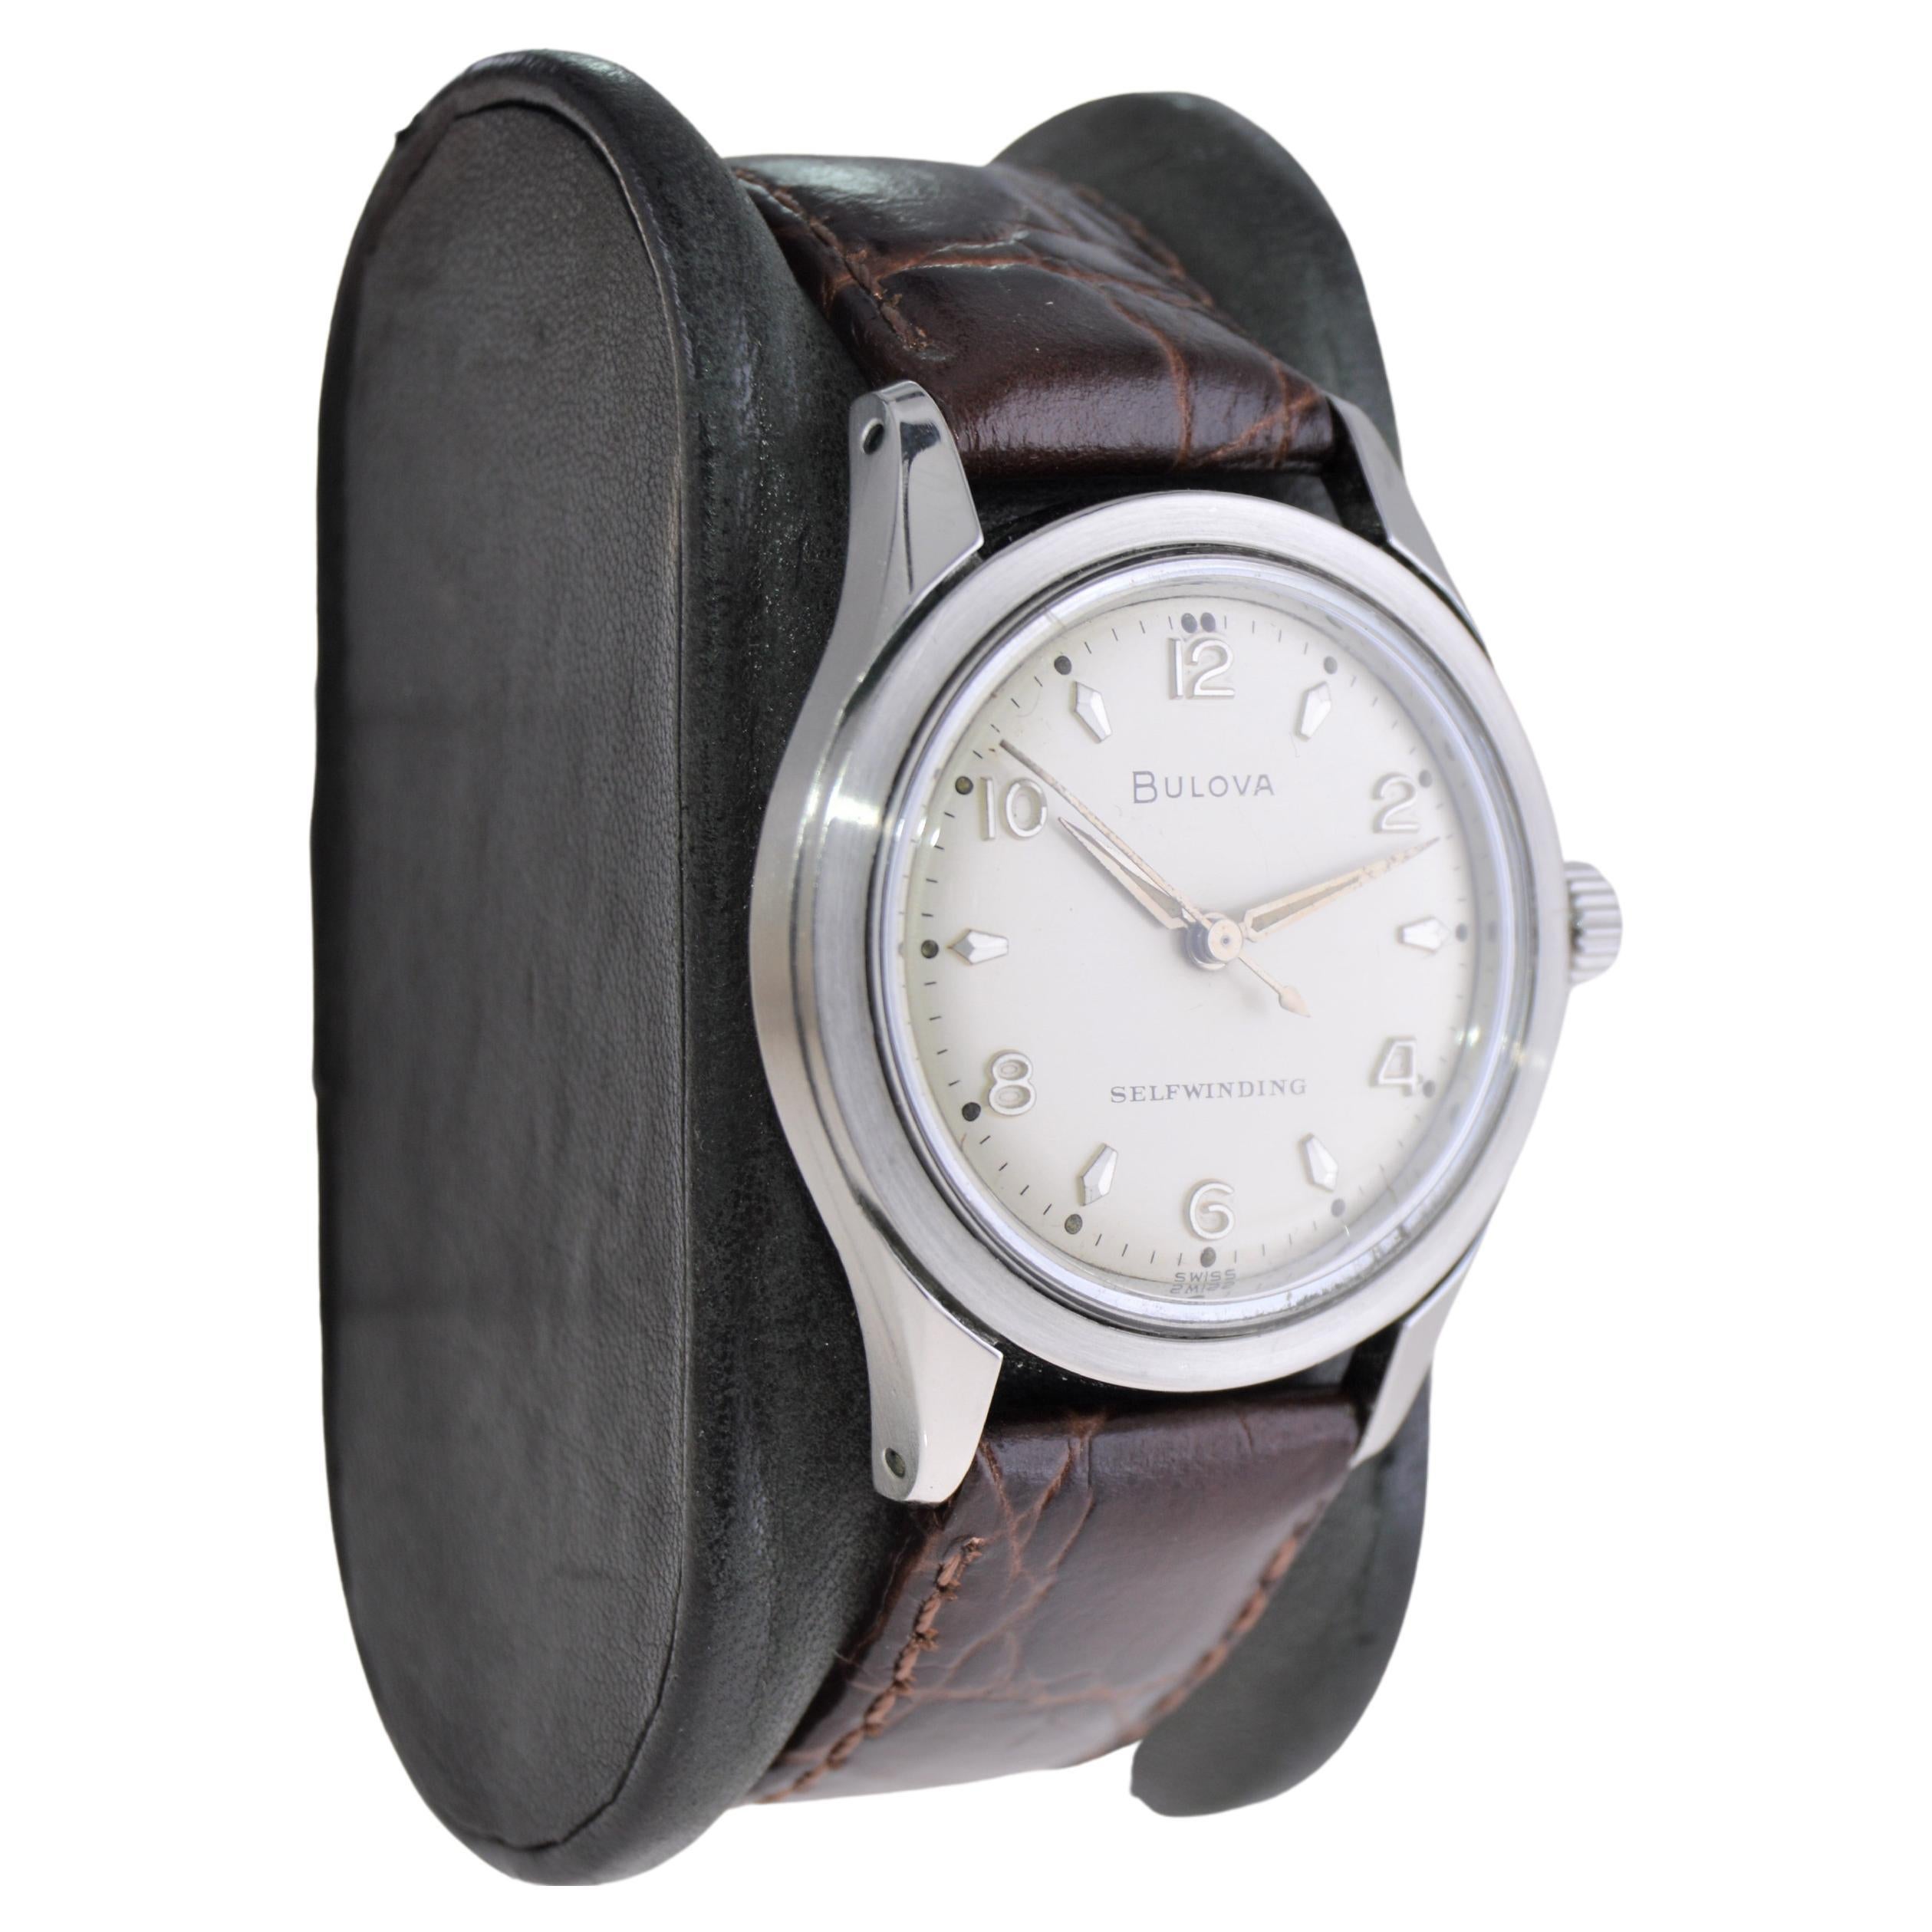 FACTORY / HOUSE: Bulova Watch Company
STYLE / REFERENCE: Round Dress Style  
METAL / MATERIAL: 14Kt. White Gold Filled
CIRCA: 1960's
DIMENSIONS: Length 40mm X Diameter 33mm
MOVEMENT / CALIBER: Winding / 17 Jewels 
DIAL / HANDS: Original Silvered